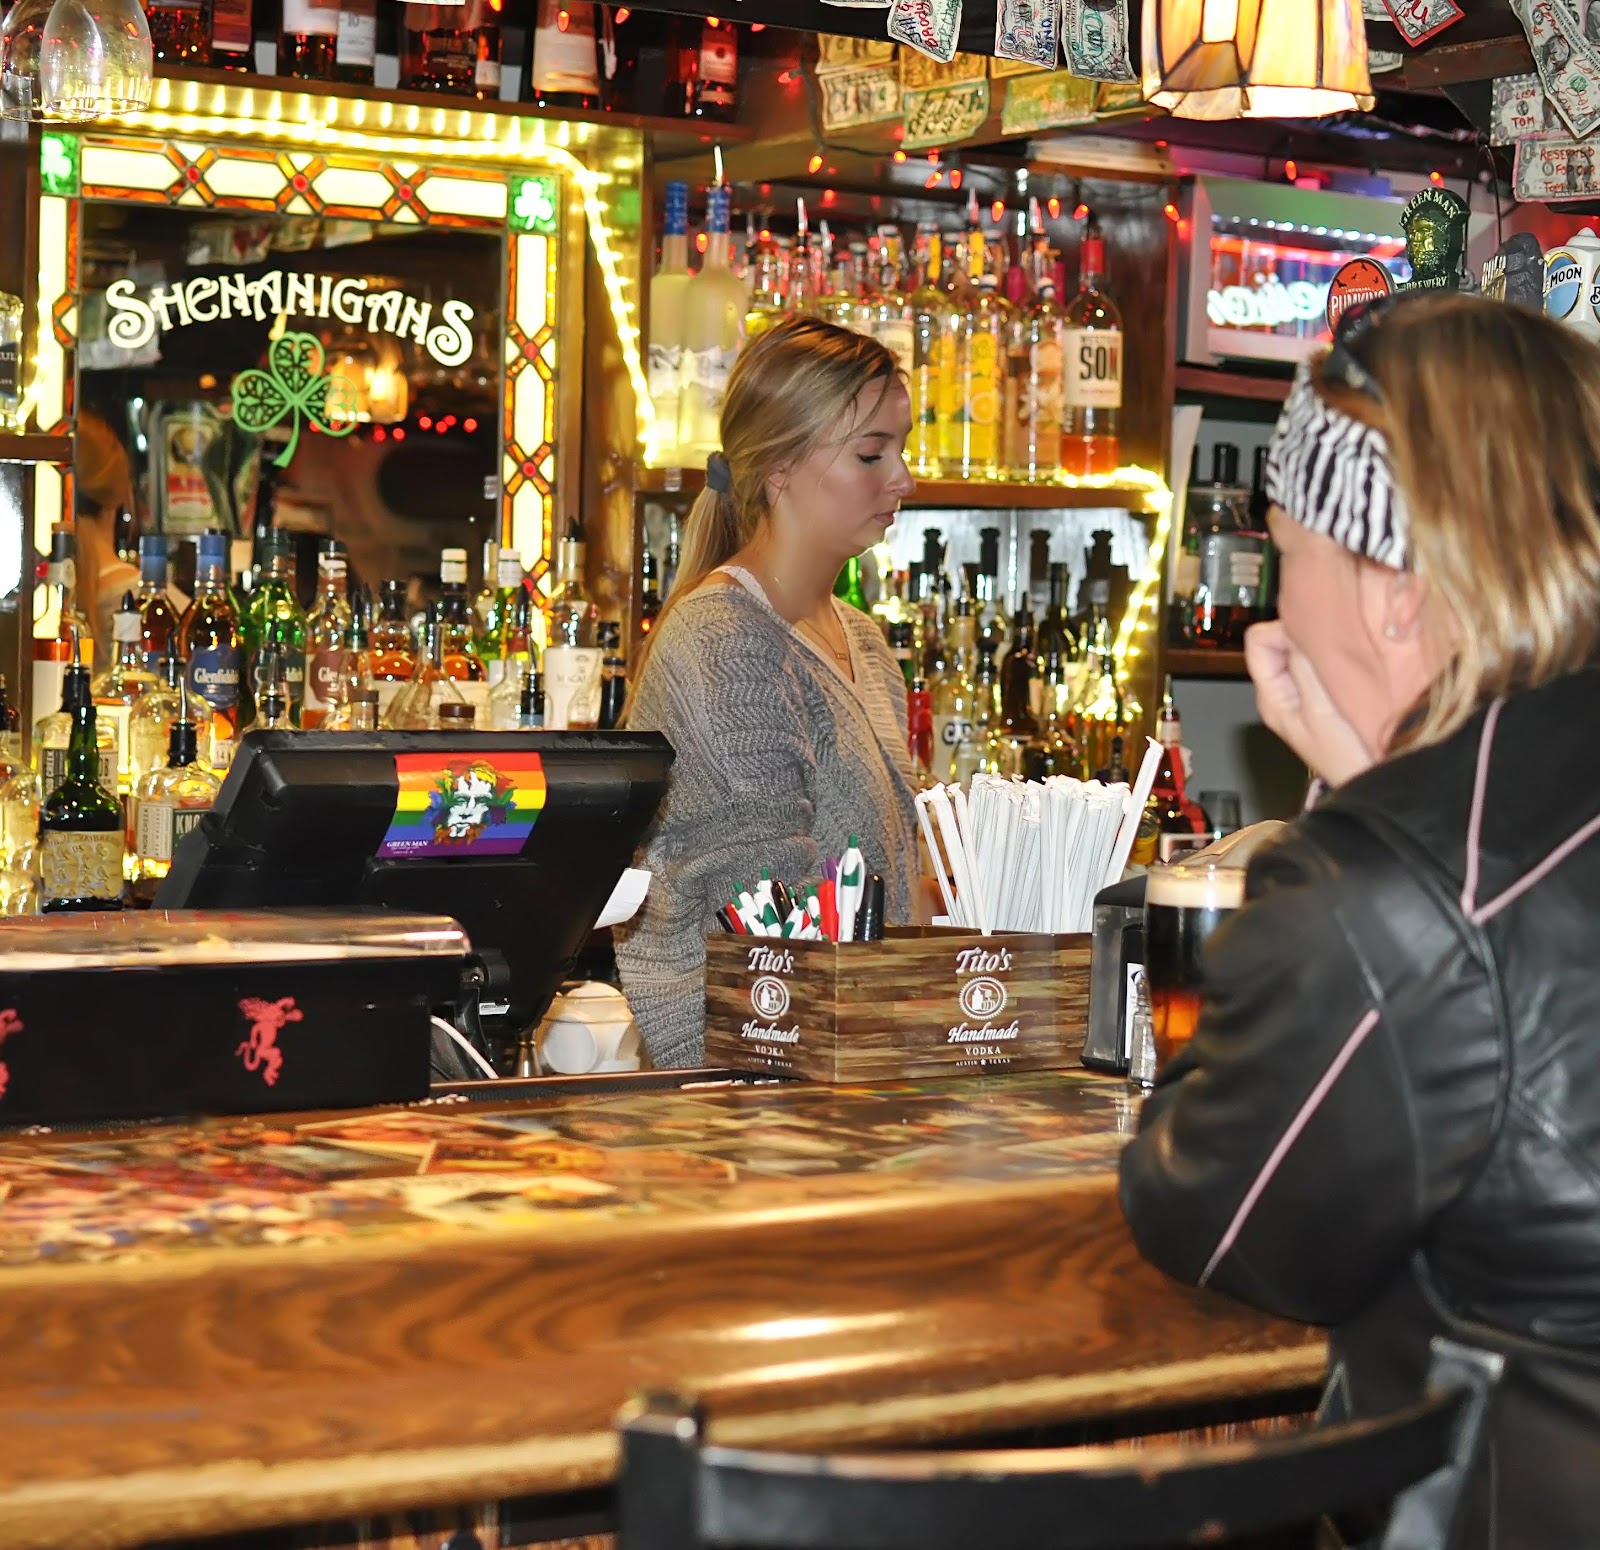 A bartender making drinks and a woman seated at the bar.